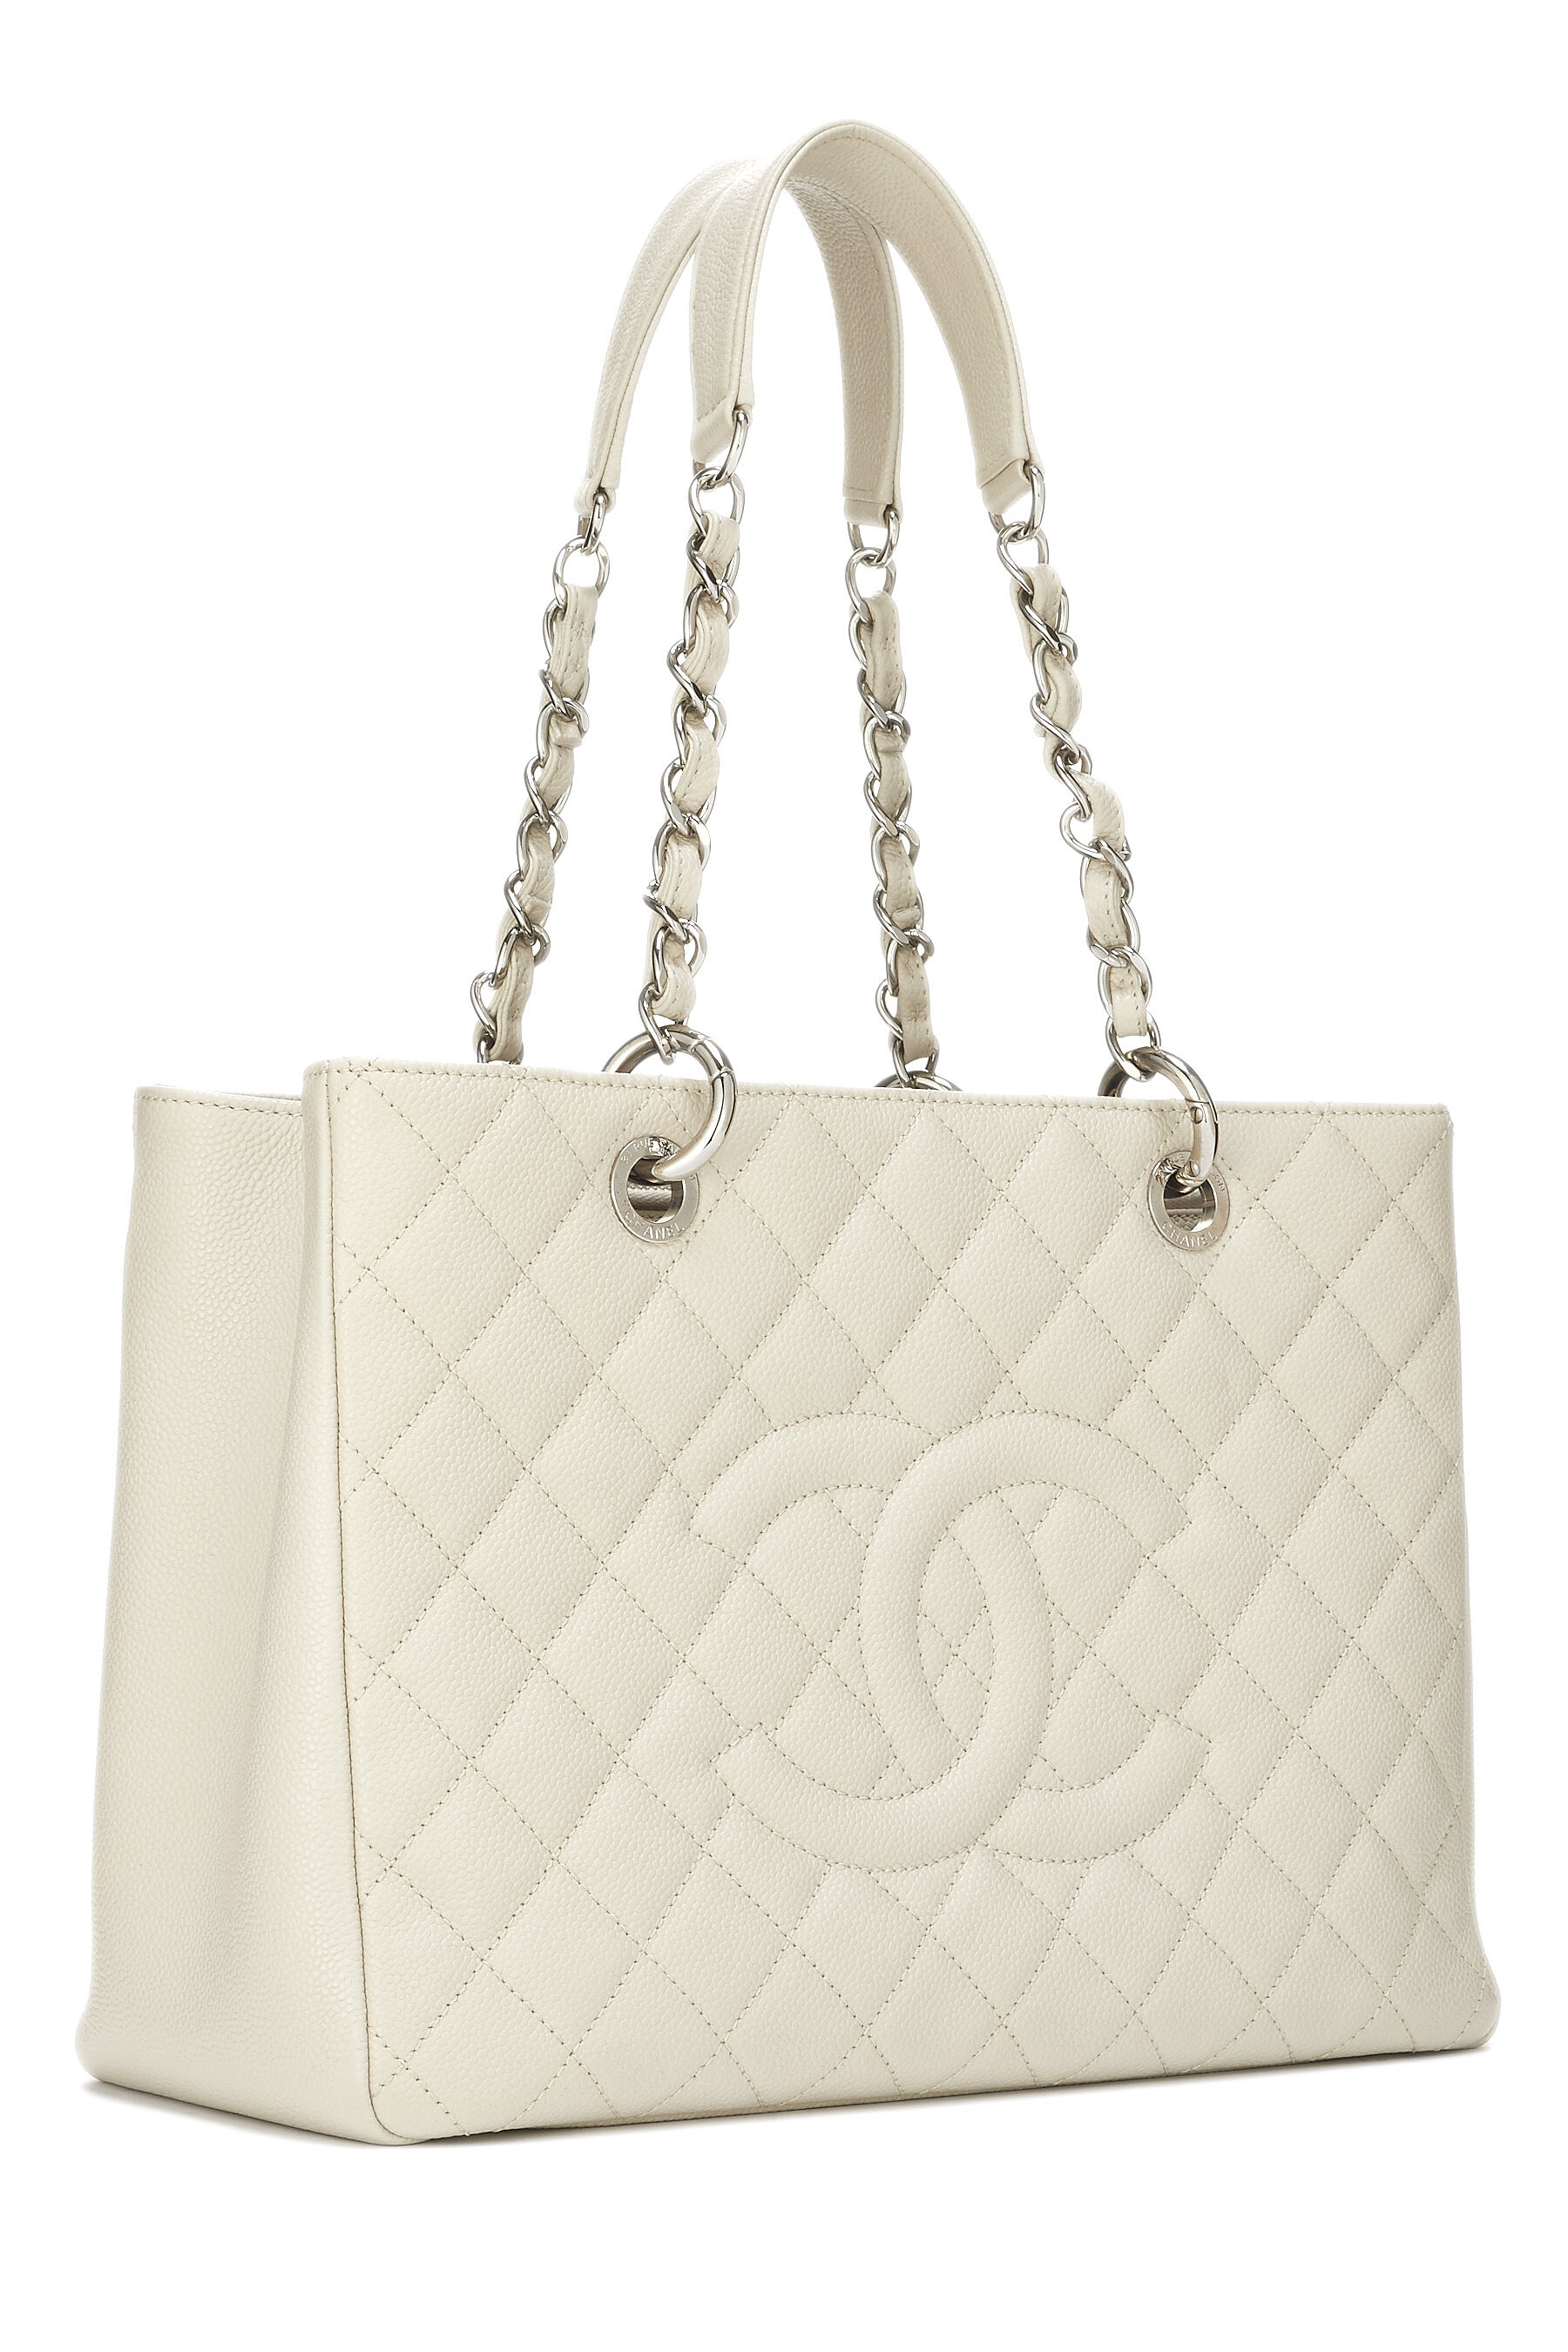 Chanel - Cream Quilted Caviar Grand Shopping Tote (GST)